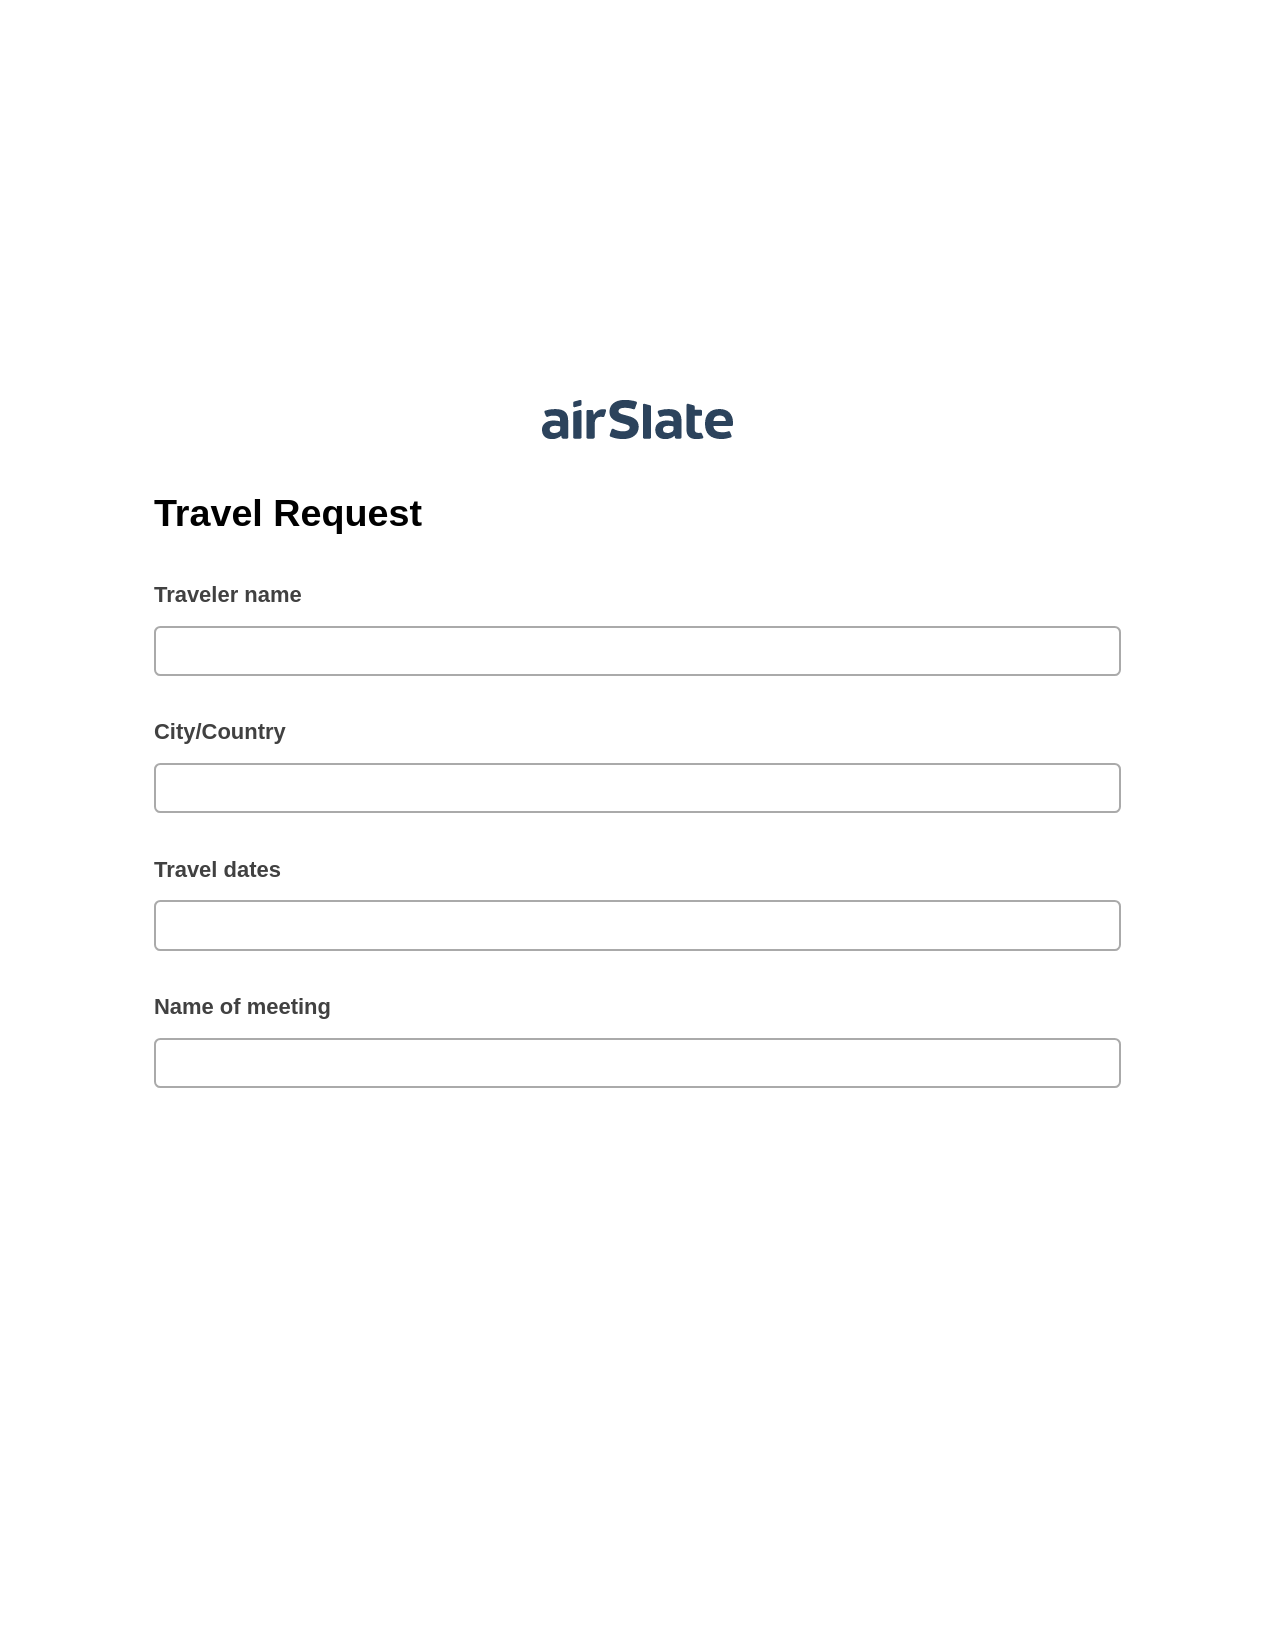 Travel Request Pre-fill Slate from MS Dynamics 365 Records Bot, Send Mailchimp Campaign Bot, Webhook Postfinish Bot